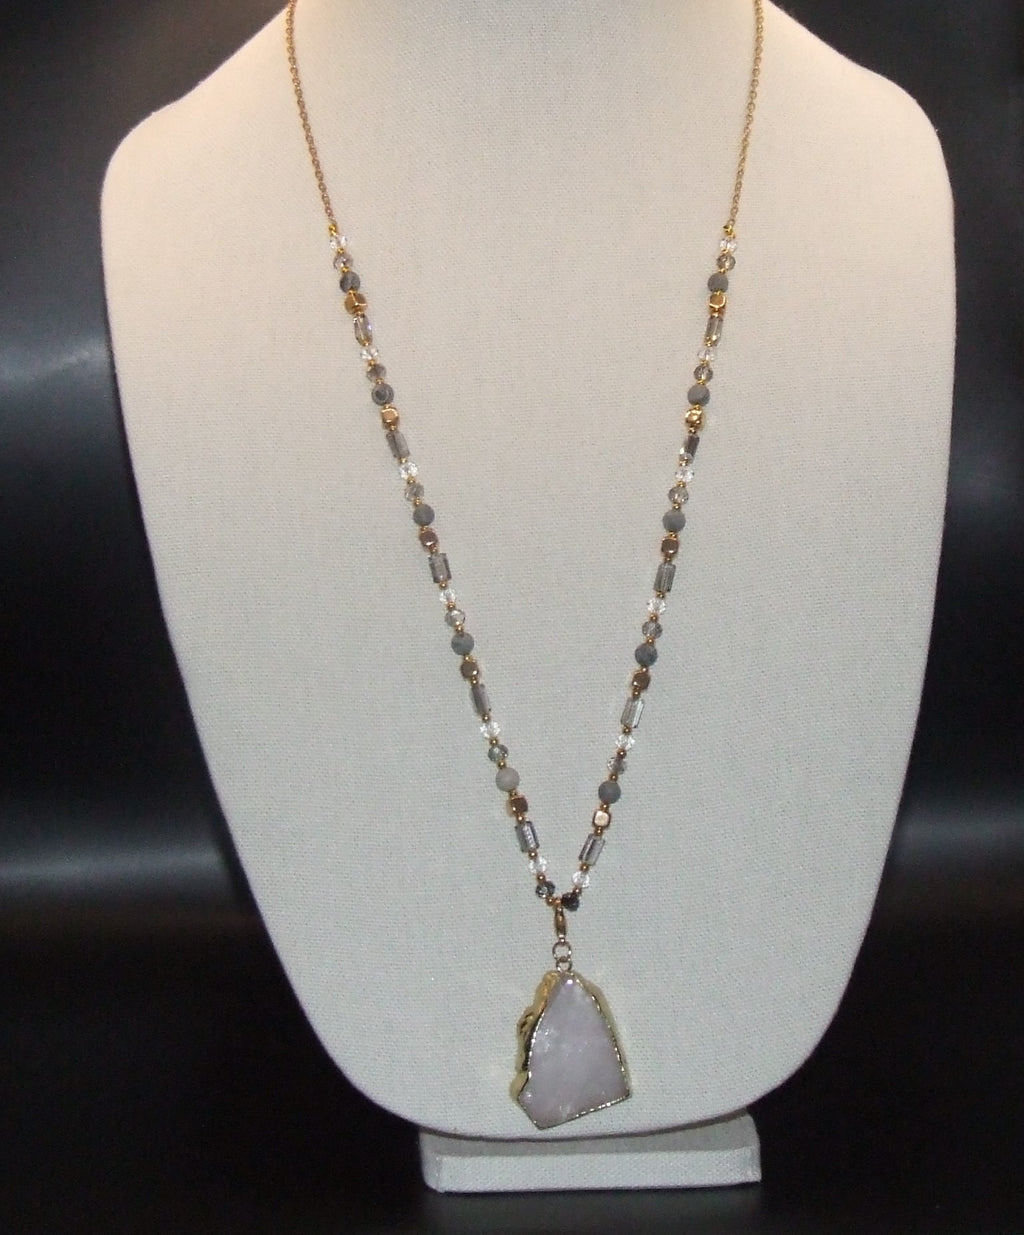 Grey Stone Crystal Beads Long Necklaces